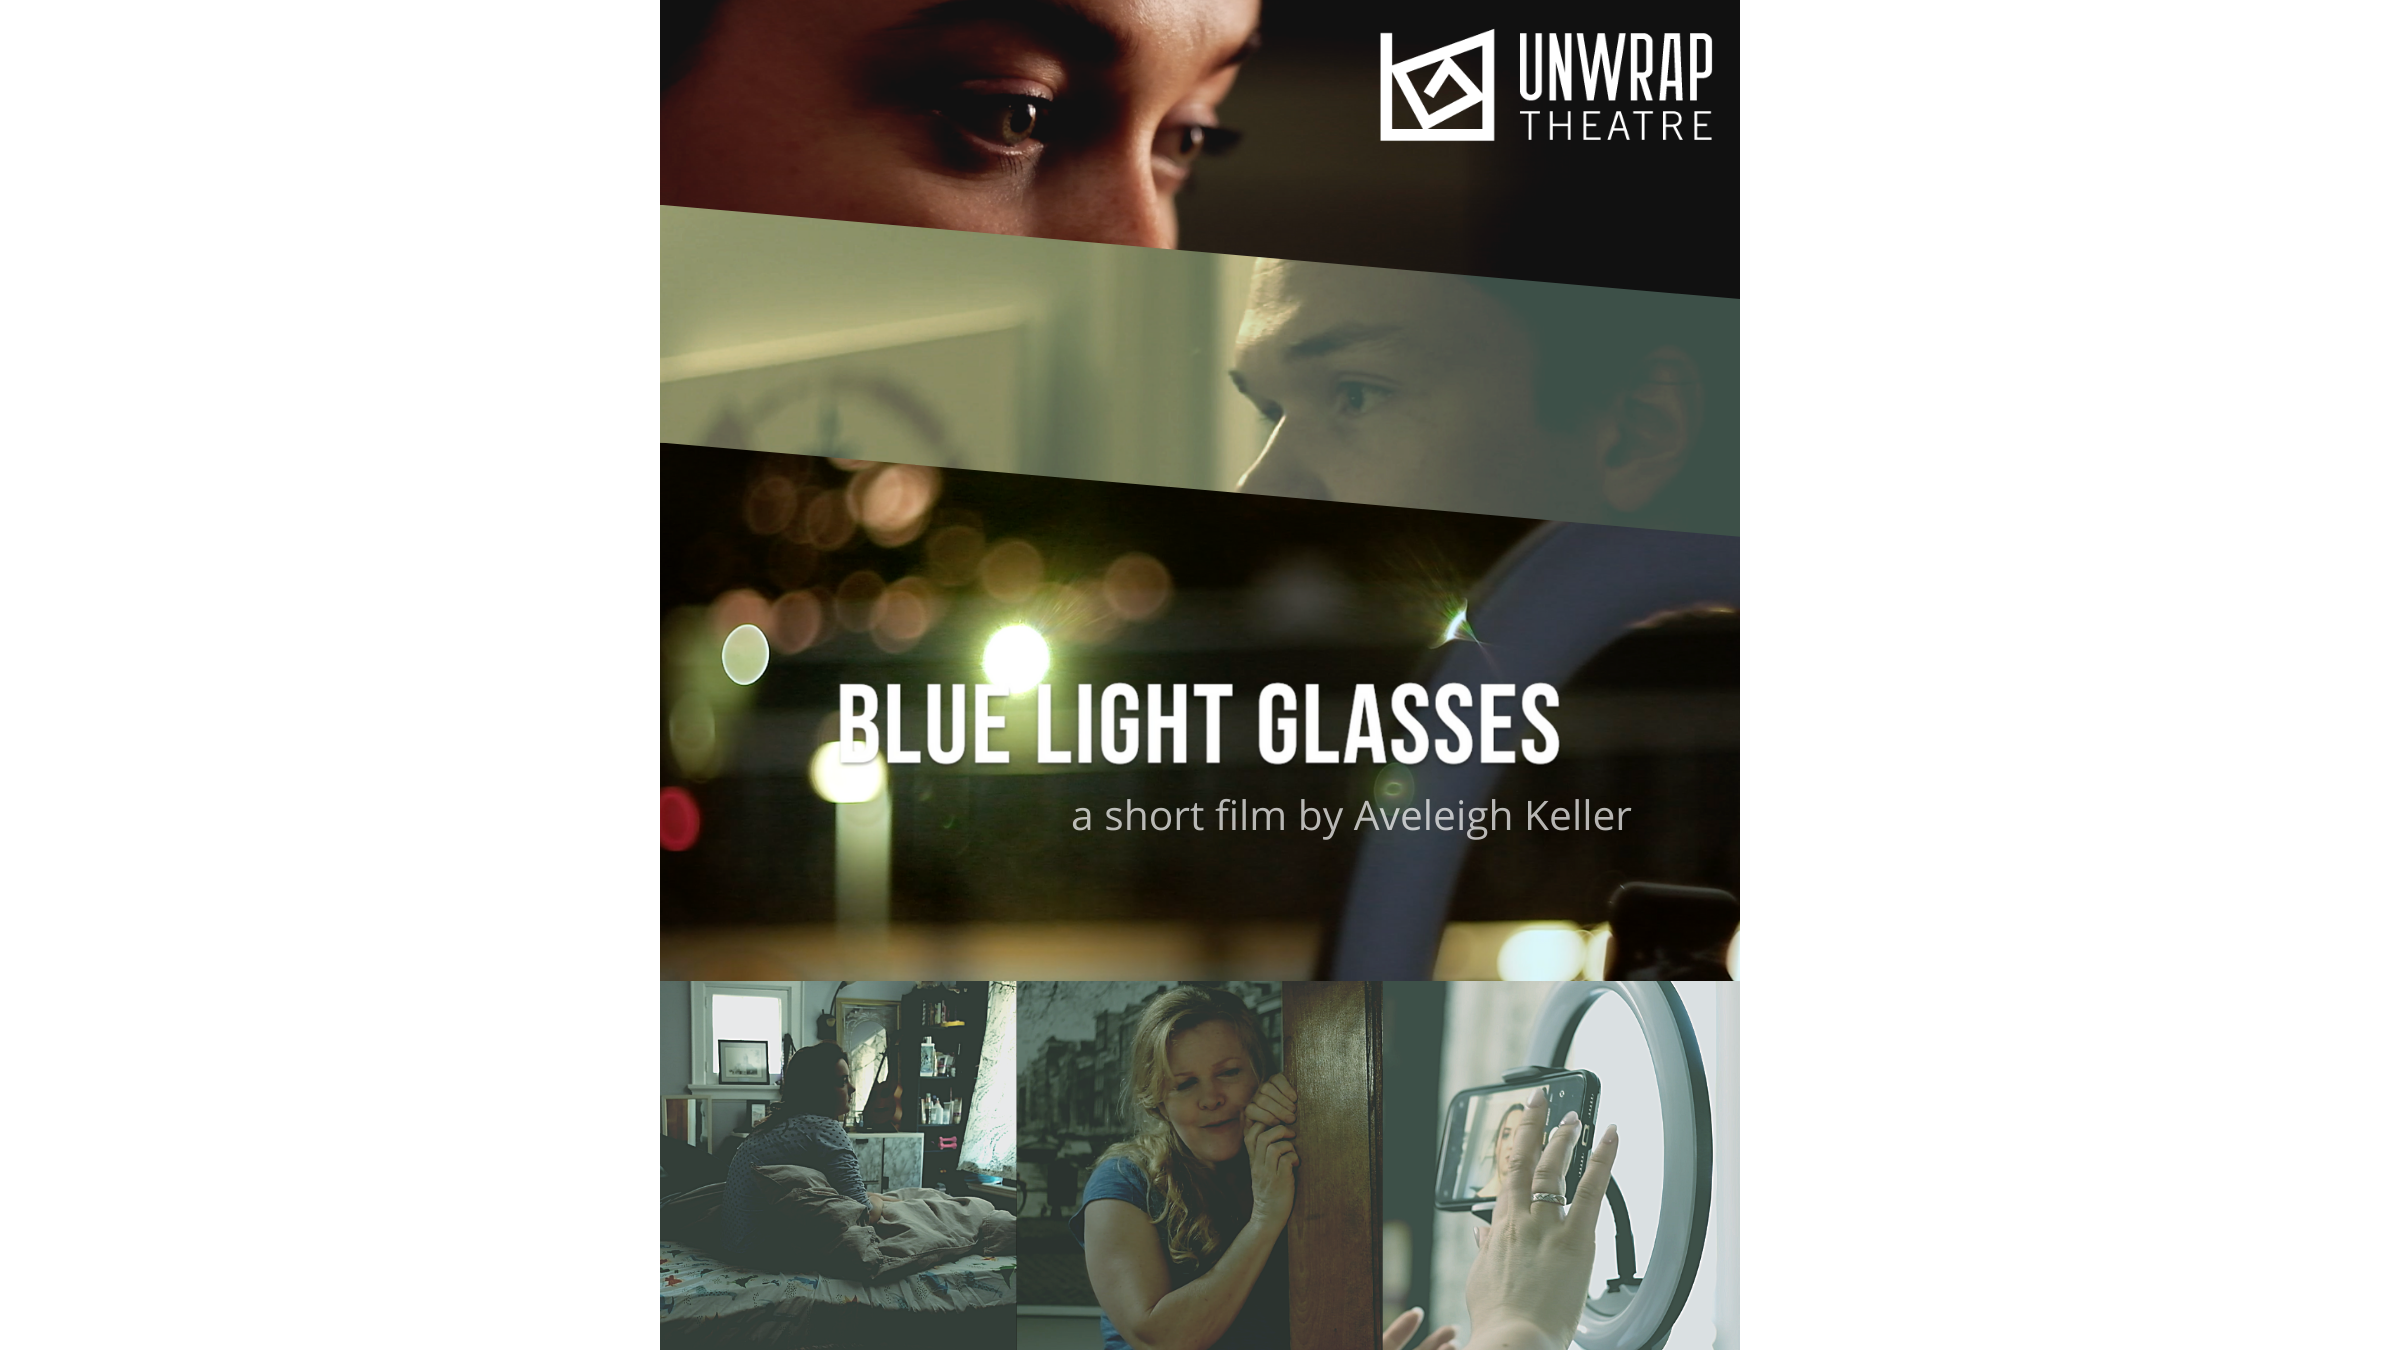 Photo for BLUE LIGHT GLASSES | A Short Film by Aveleigh Keller | Unwrap Theatre 2021 on ViewStub